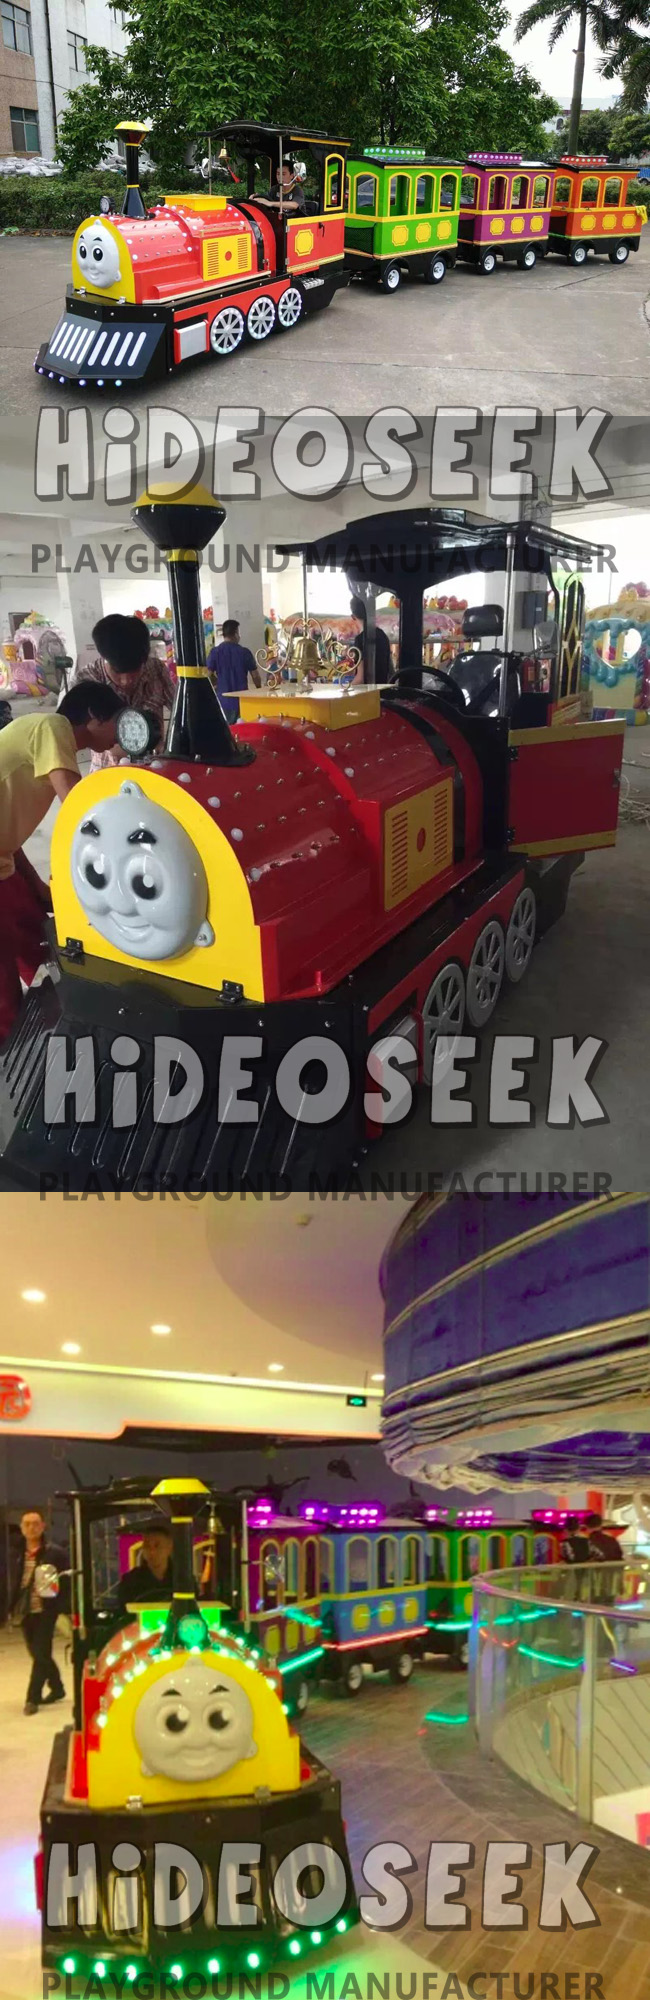 Electroic Trackless Train Series for Indoor and Outdoor Amusement Park